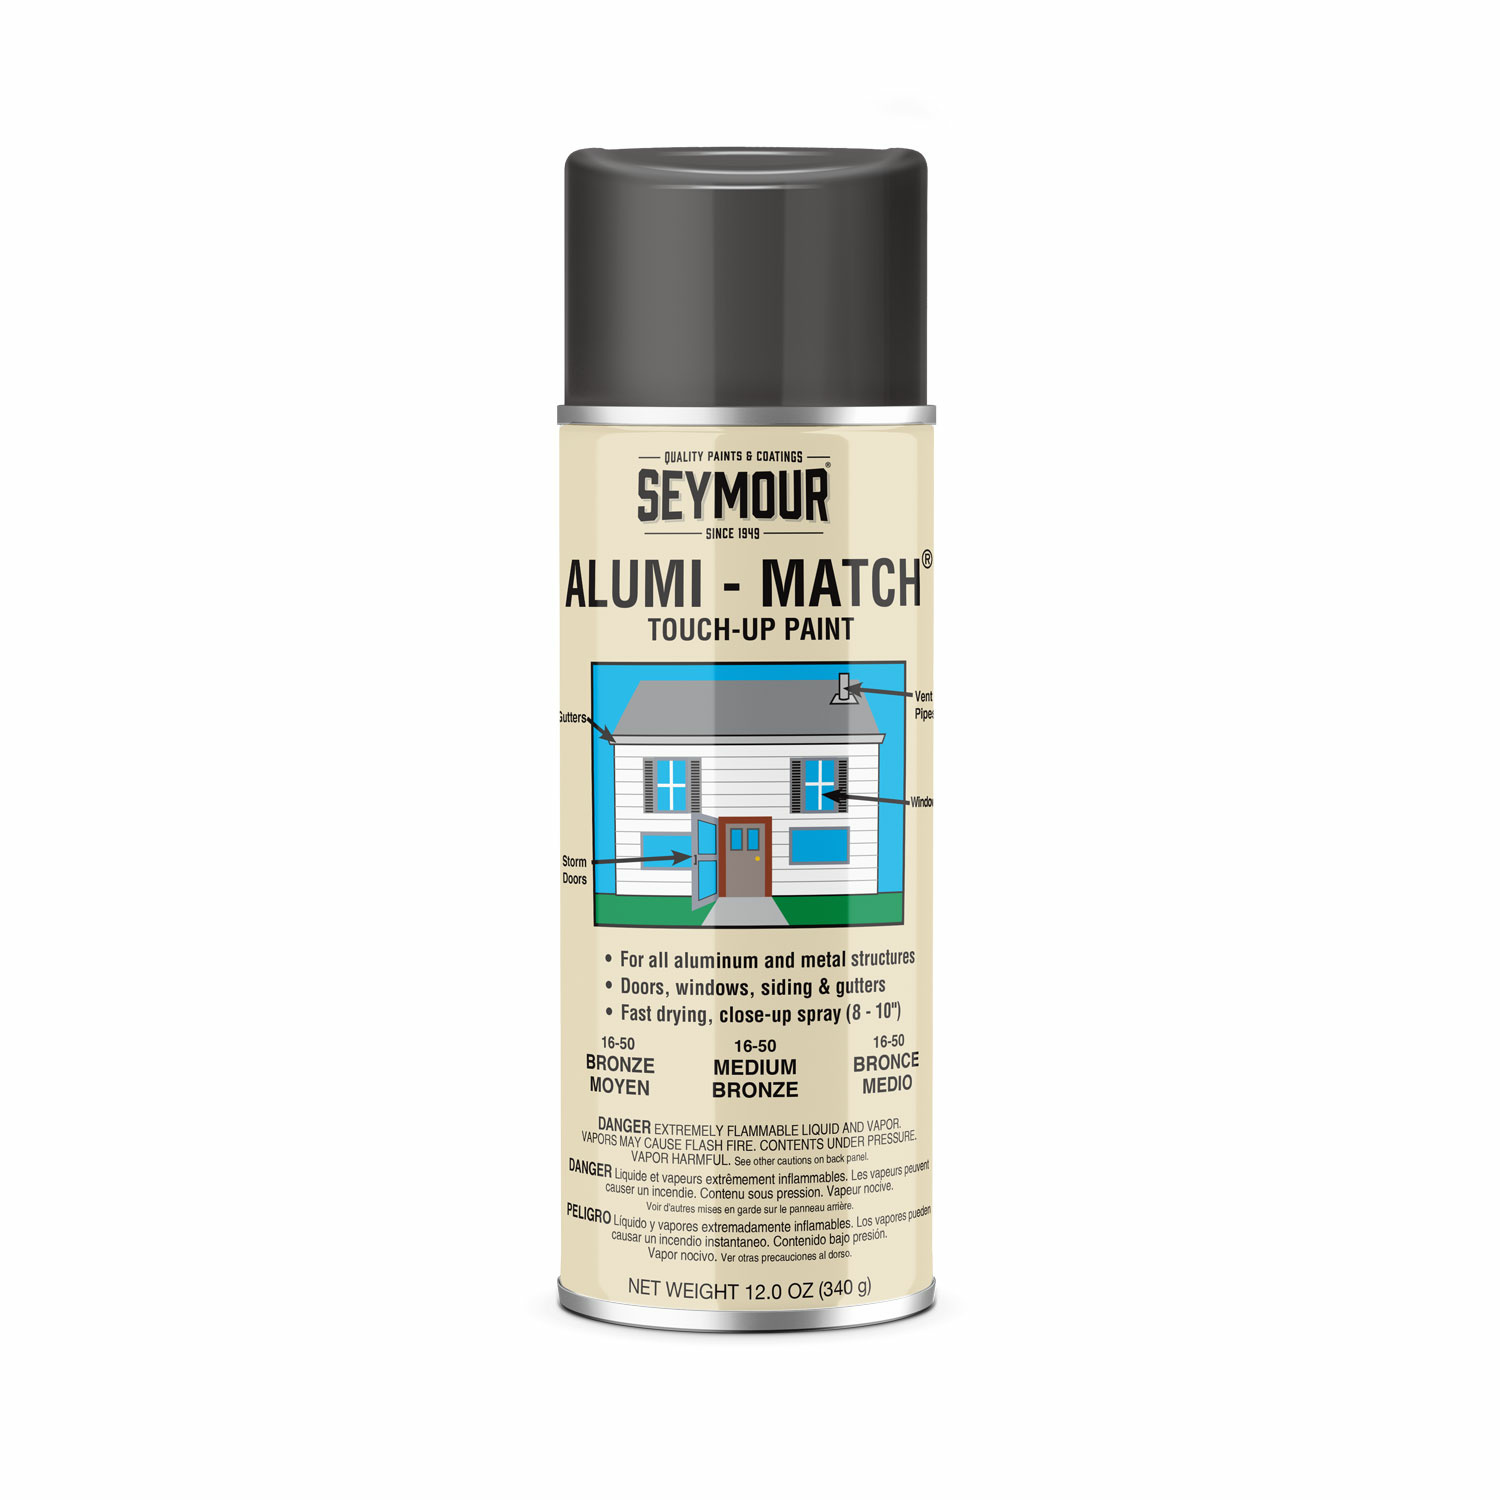 16-50 Seymour Alumi-Match Professional Structural Aluminum Touch-Up Spray Paint